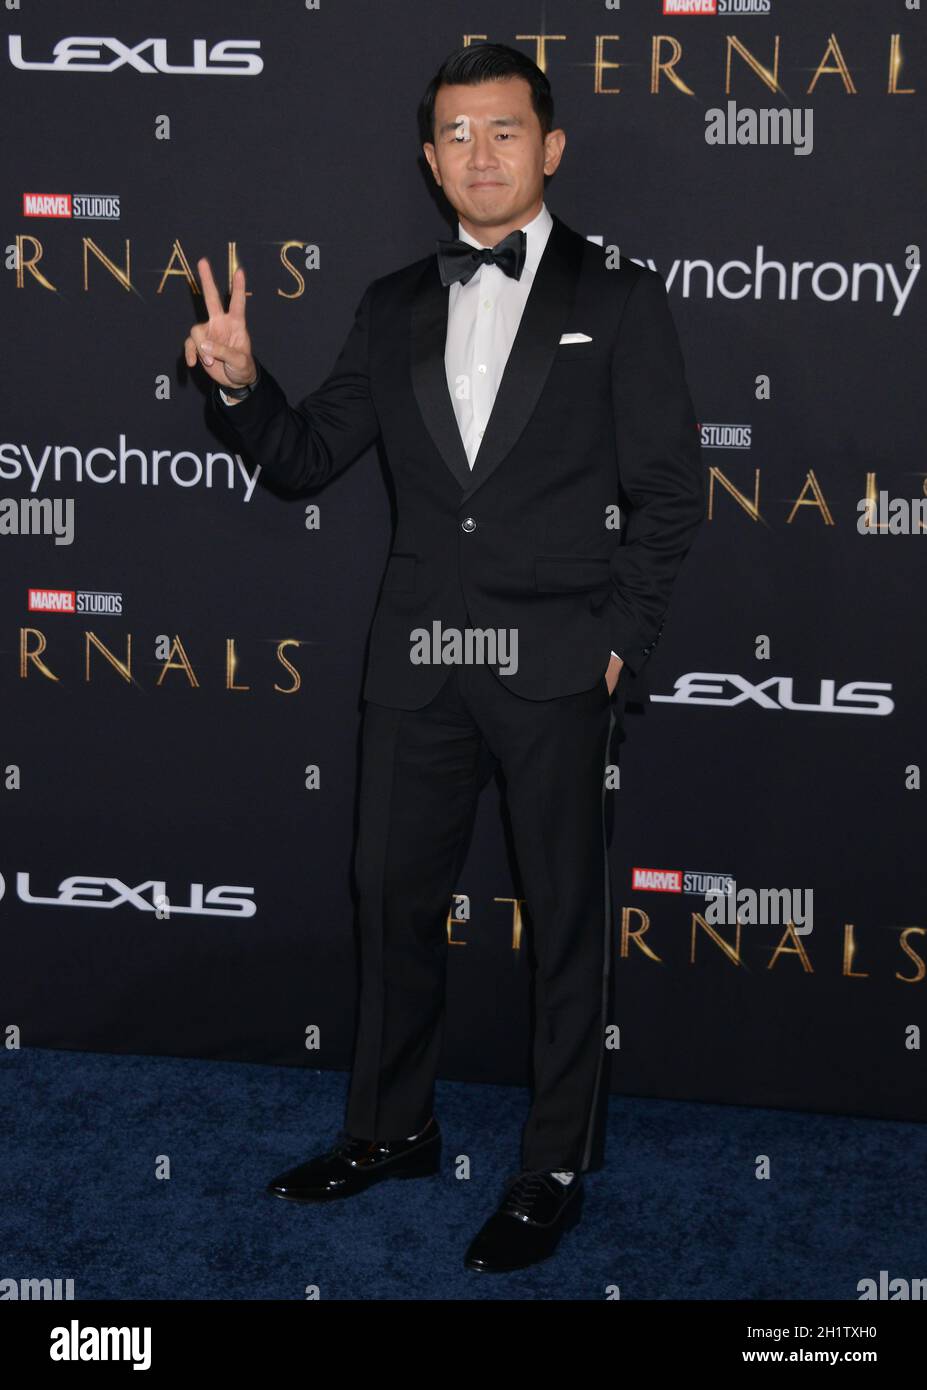 Los Angeles, USA. 19th Oct, 2021. Ronny Chieng 039 attends Marvel Studios' 'Eternals' premiere on October 18, 2021 in Los Angeles, Credit: Tsuni/USA/Alamy Live News Stock Photo